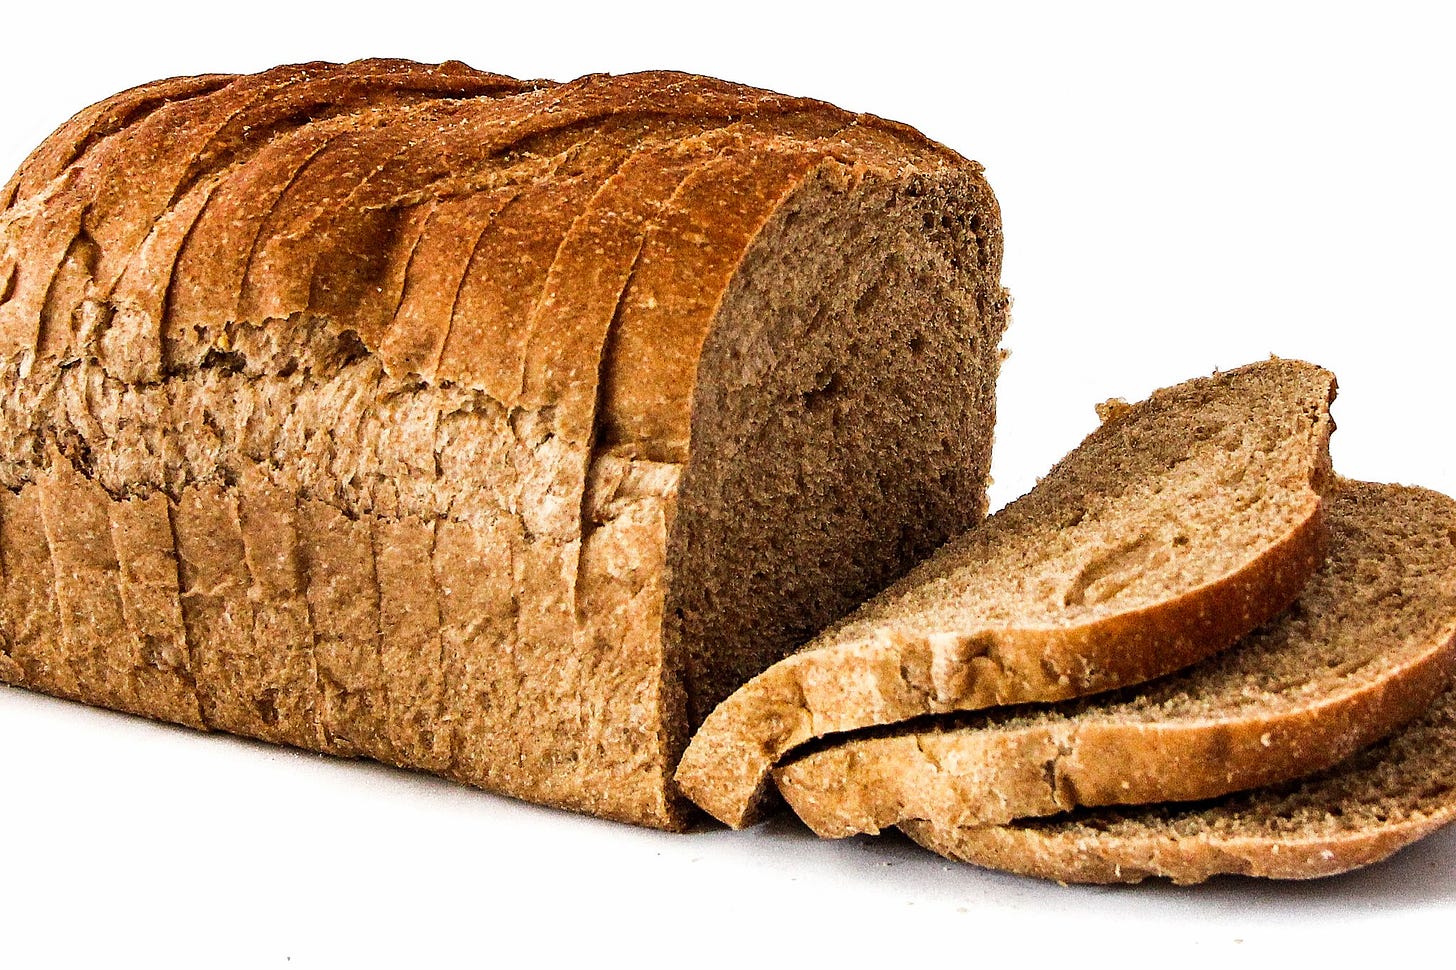 an image of bread that has been cut into slices